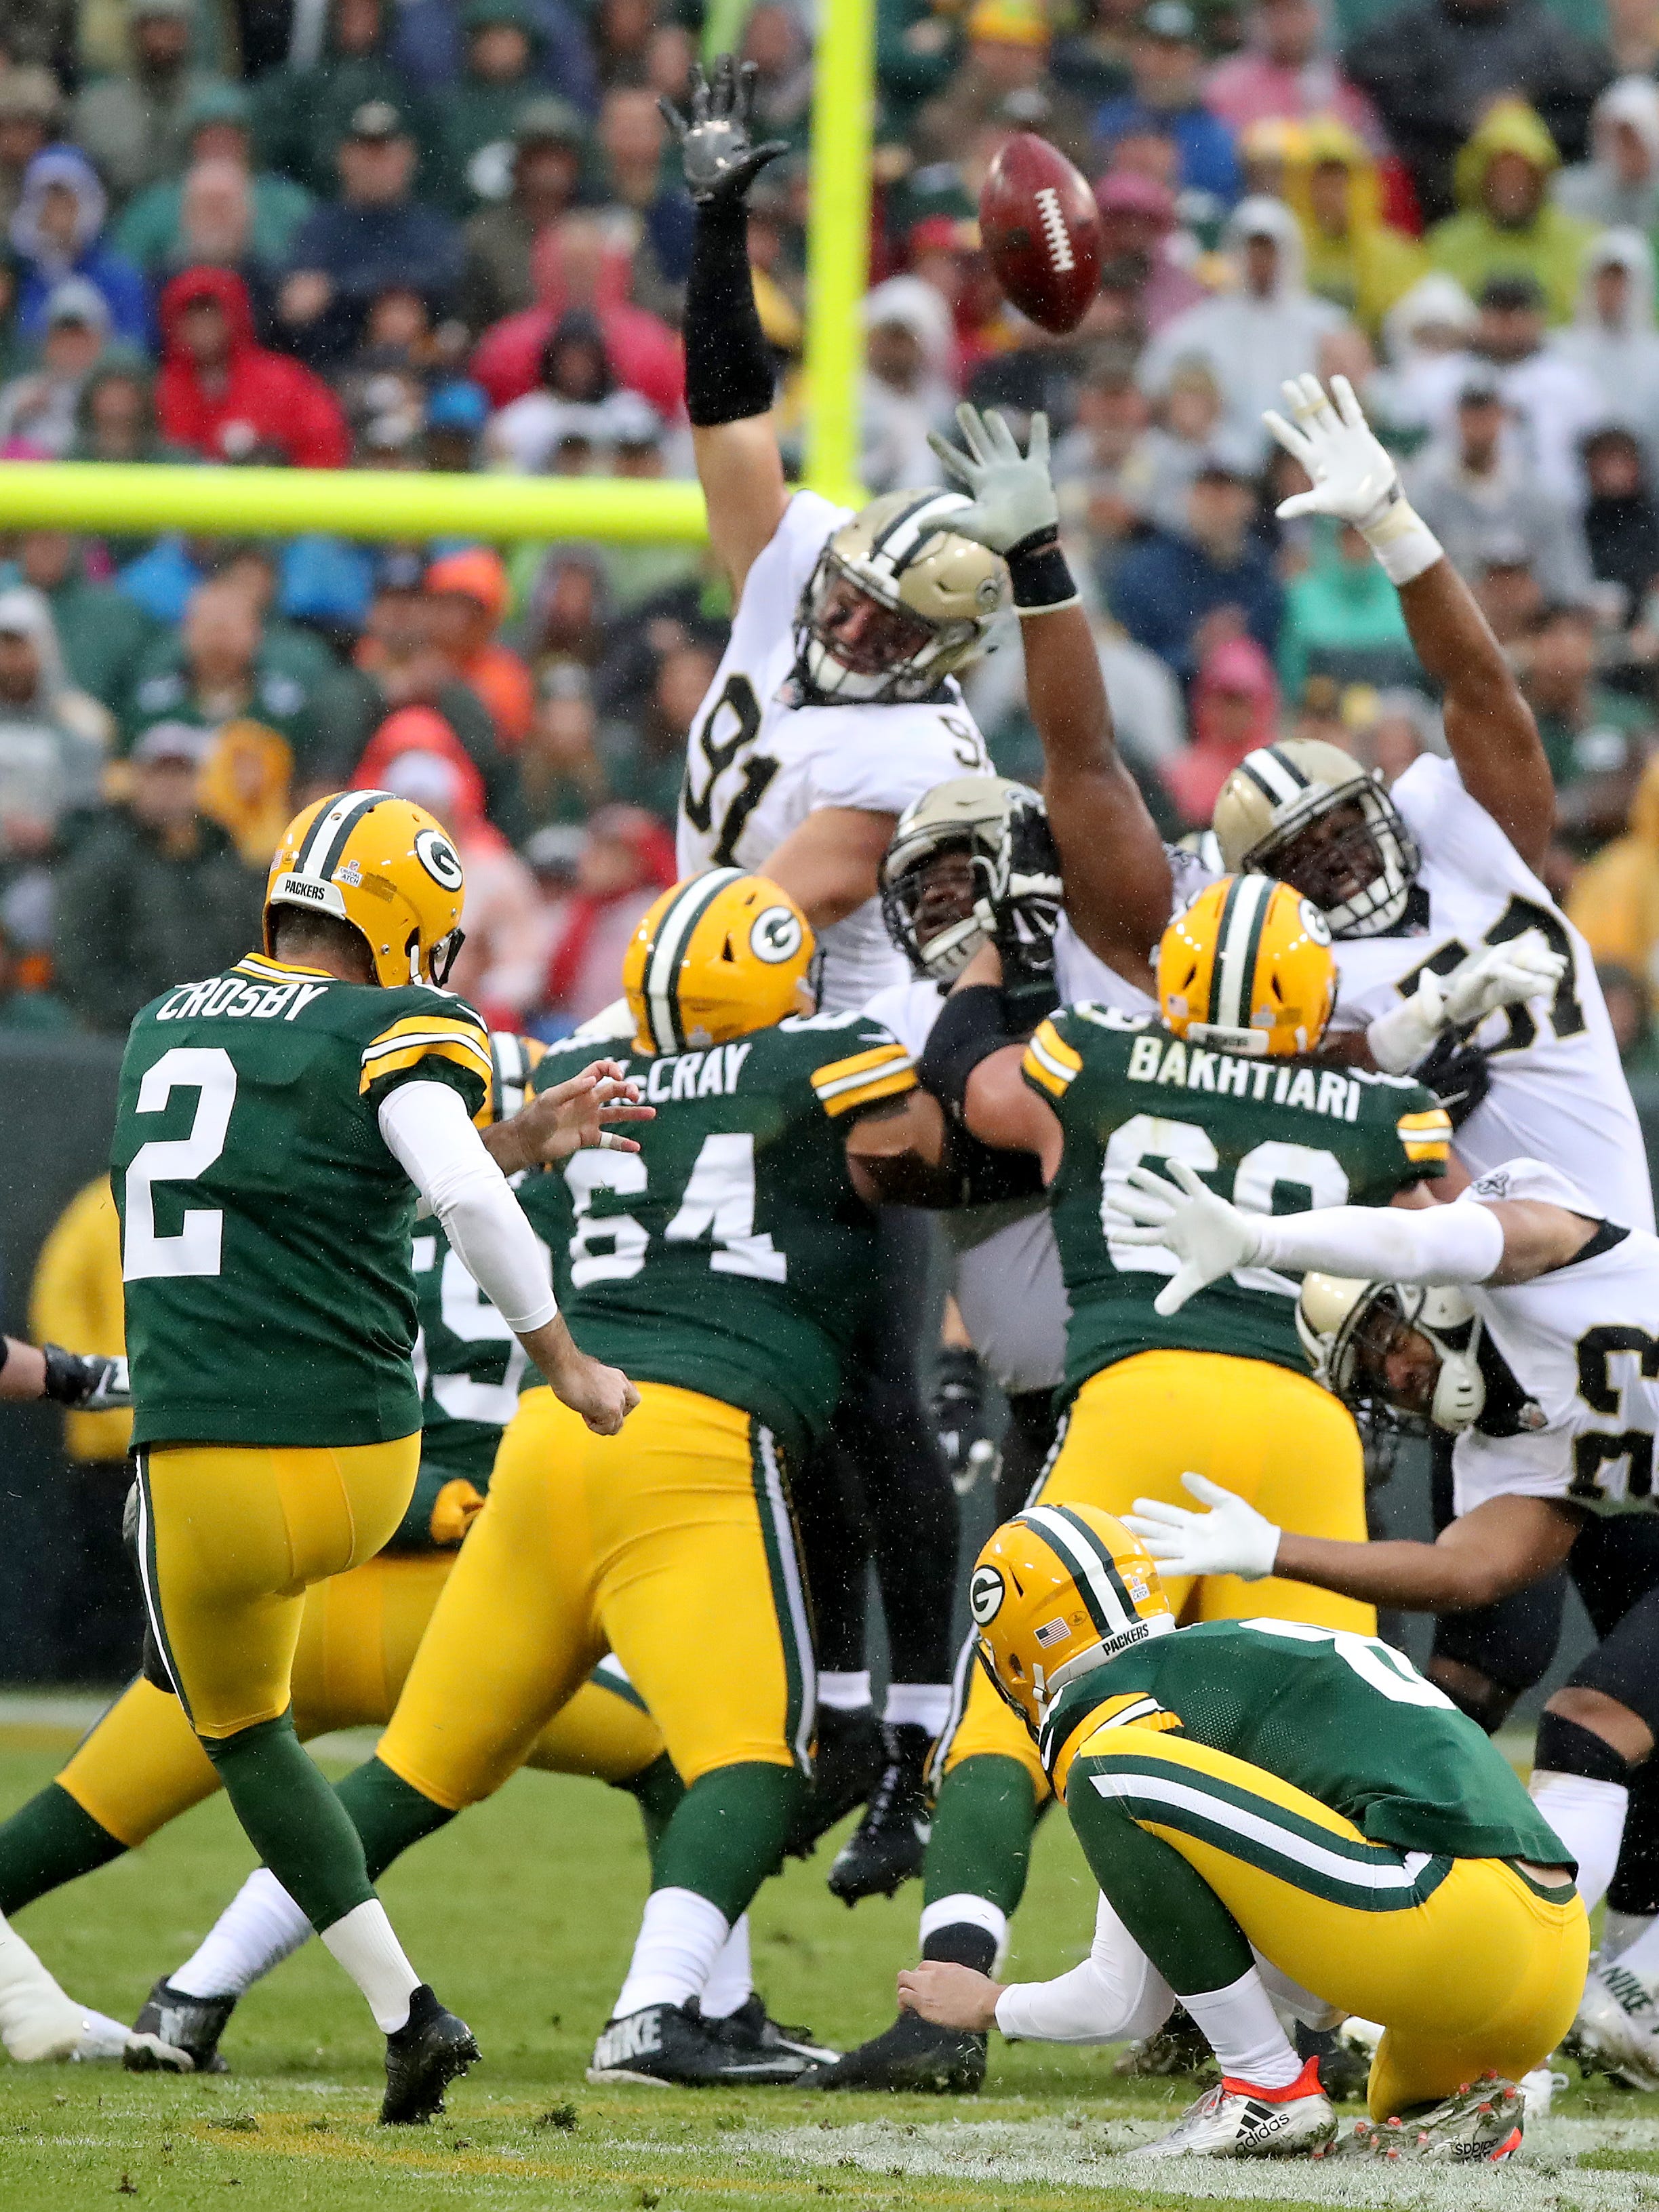 Green Bay Packers kicker Mason Crosby (2) misses on a 59-yard field goal attempt against the New Orleans Saints on Oct. 22, 2017, at Lambeau Field.